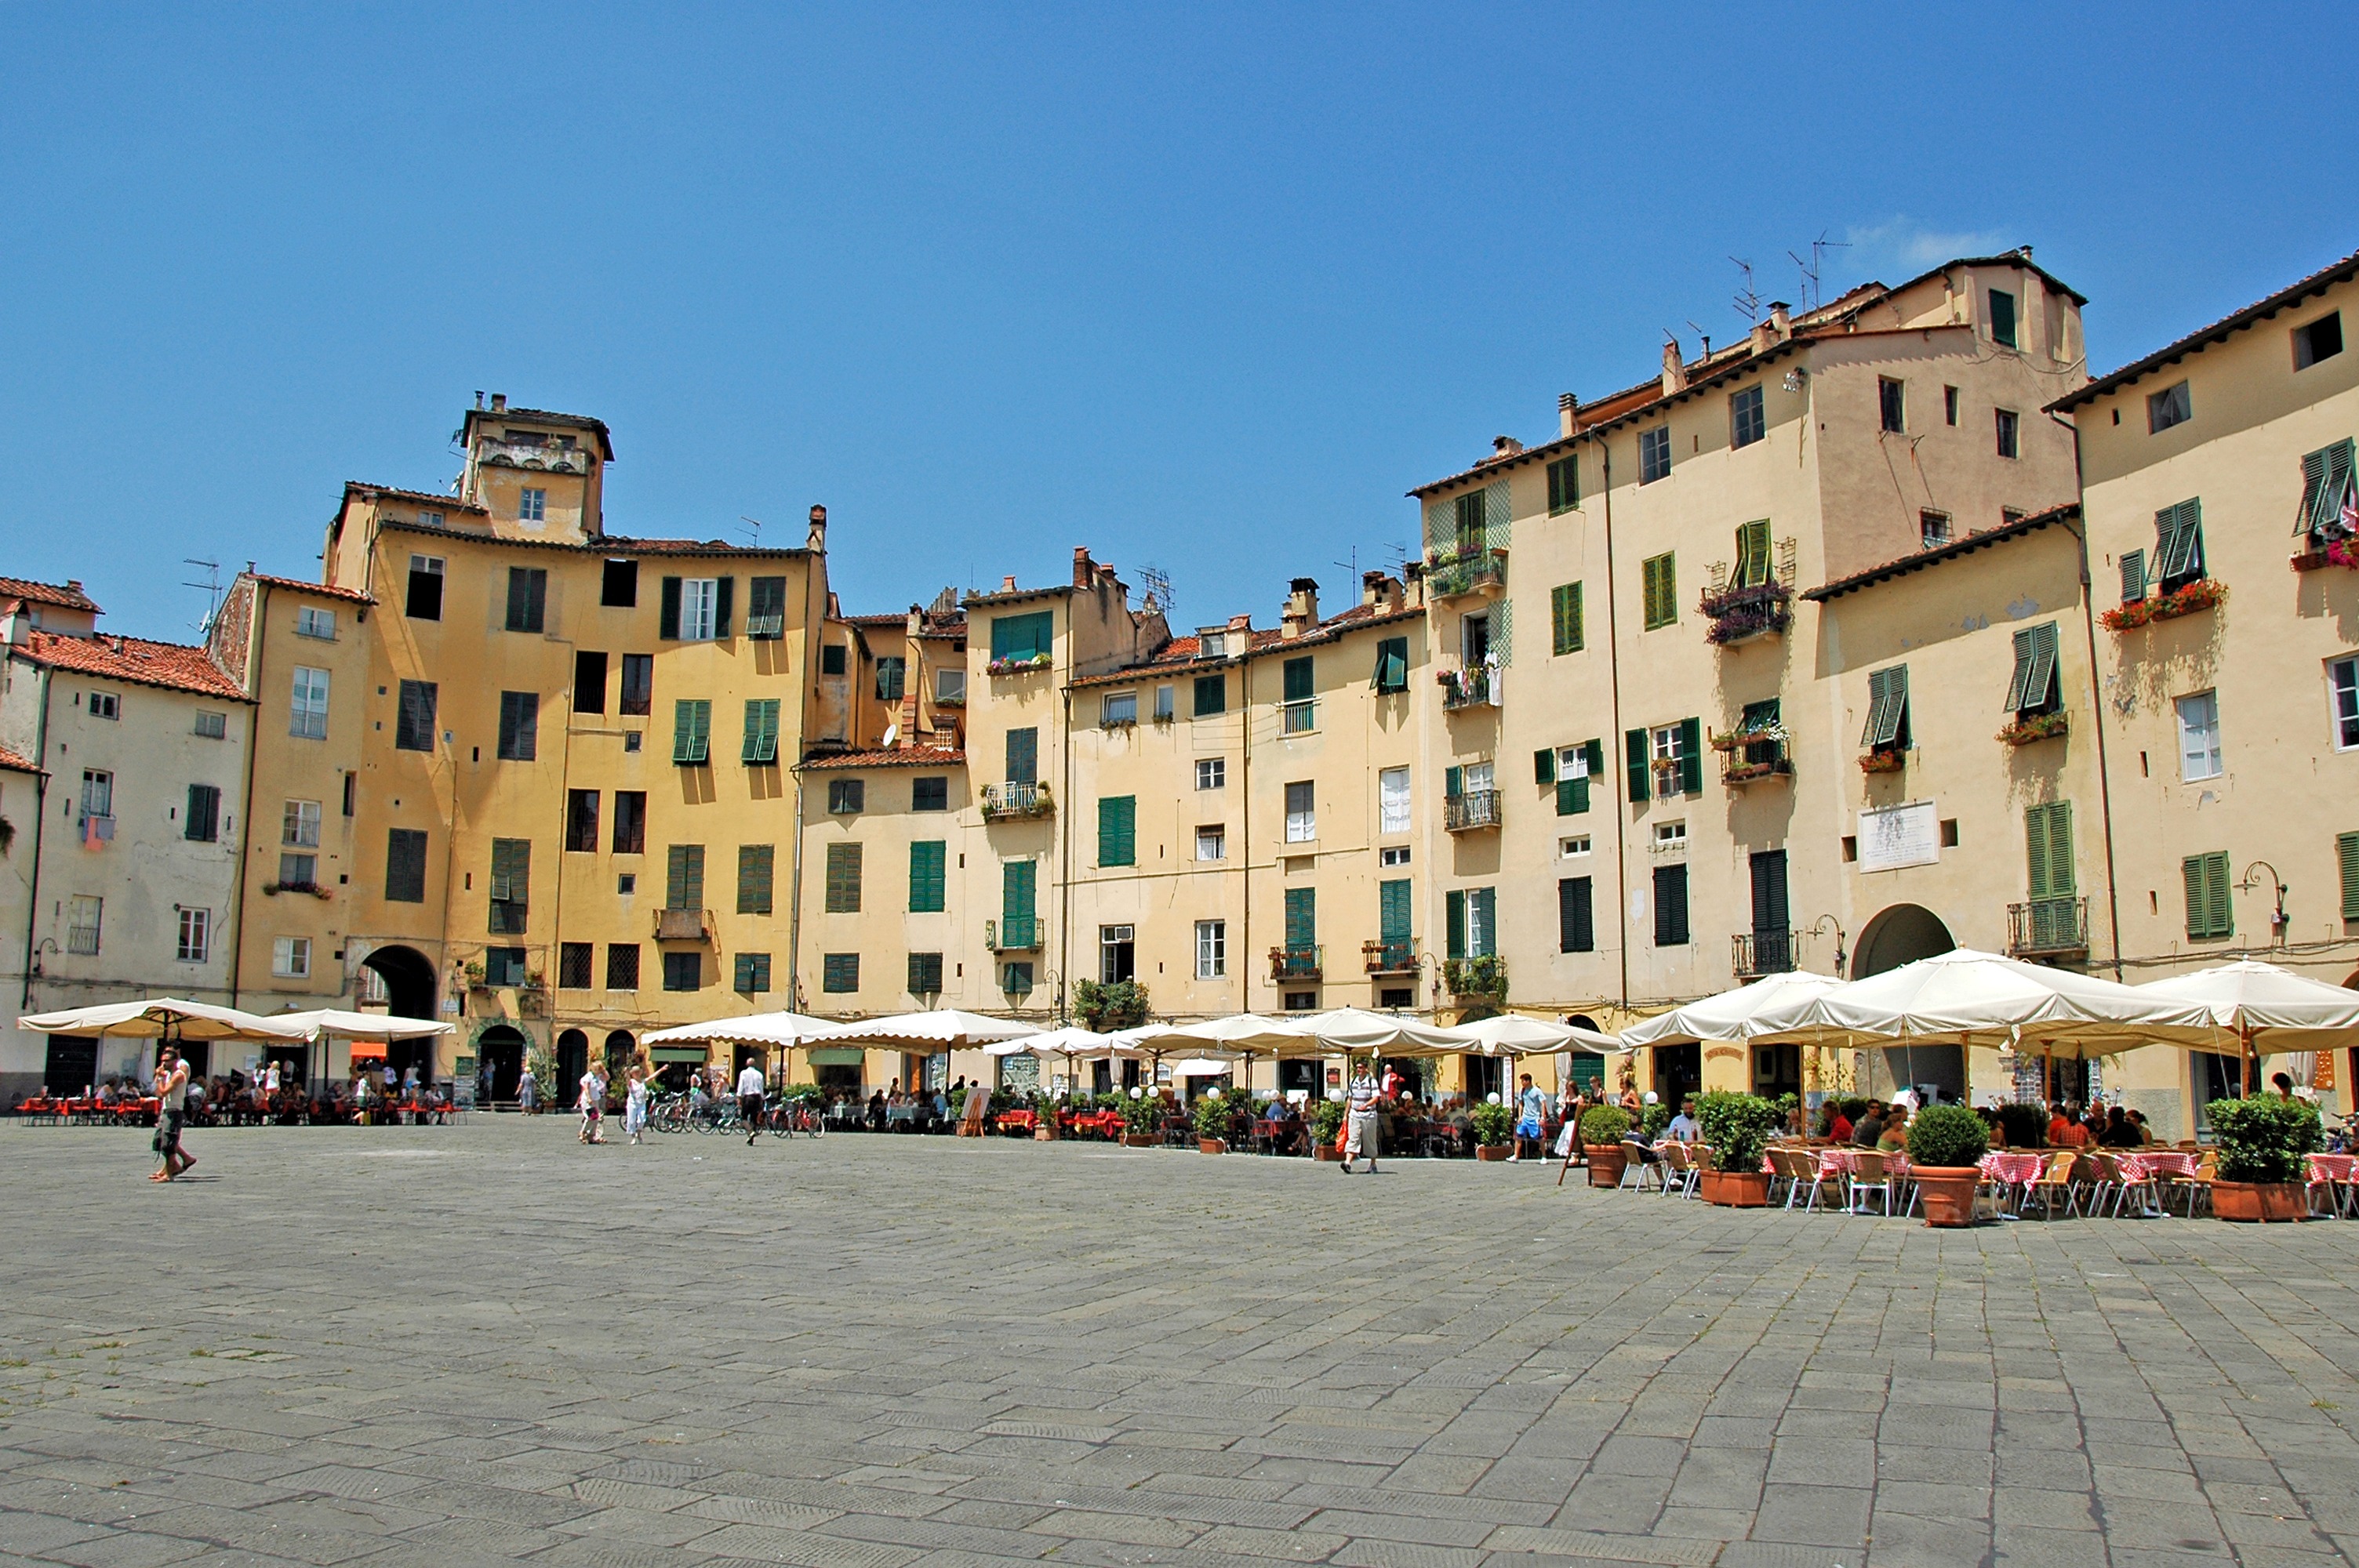 Tuscan Treats | Piazza Anfiteatro, Lucca, Italy